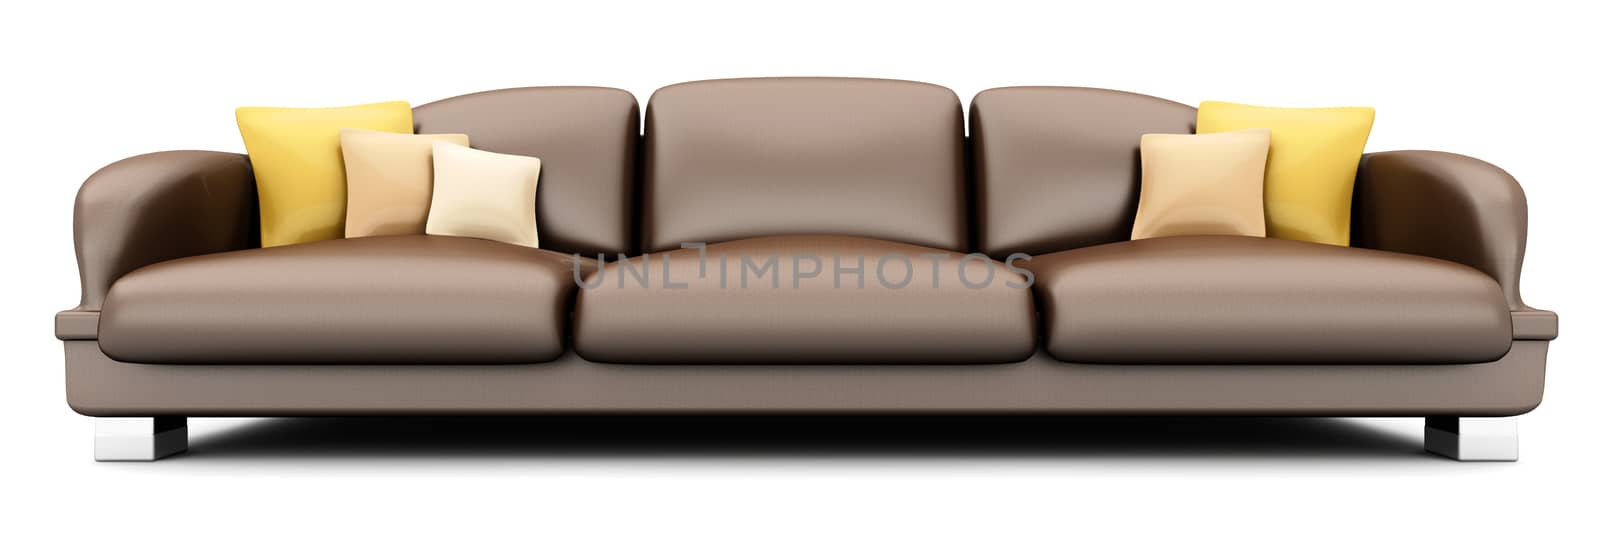 A Sofa. 3D rendered Illustration. Isolated on white.